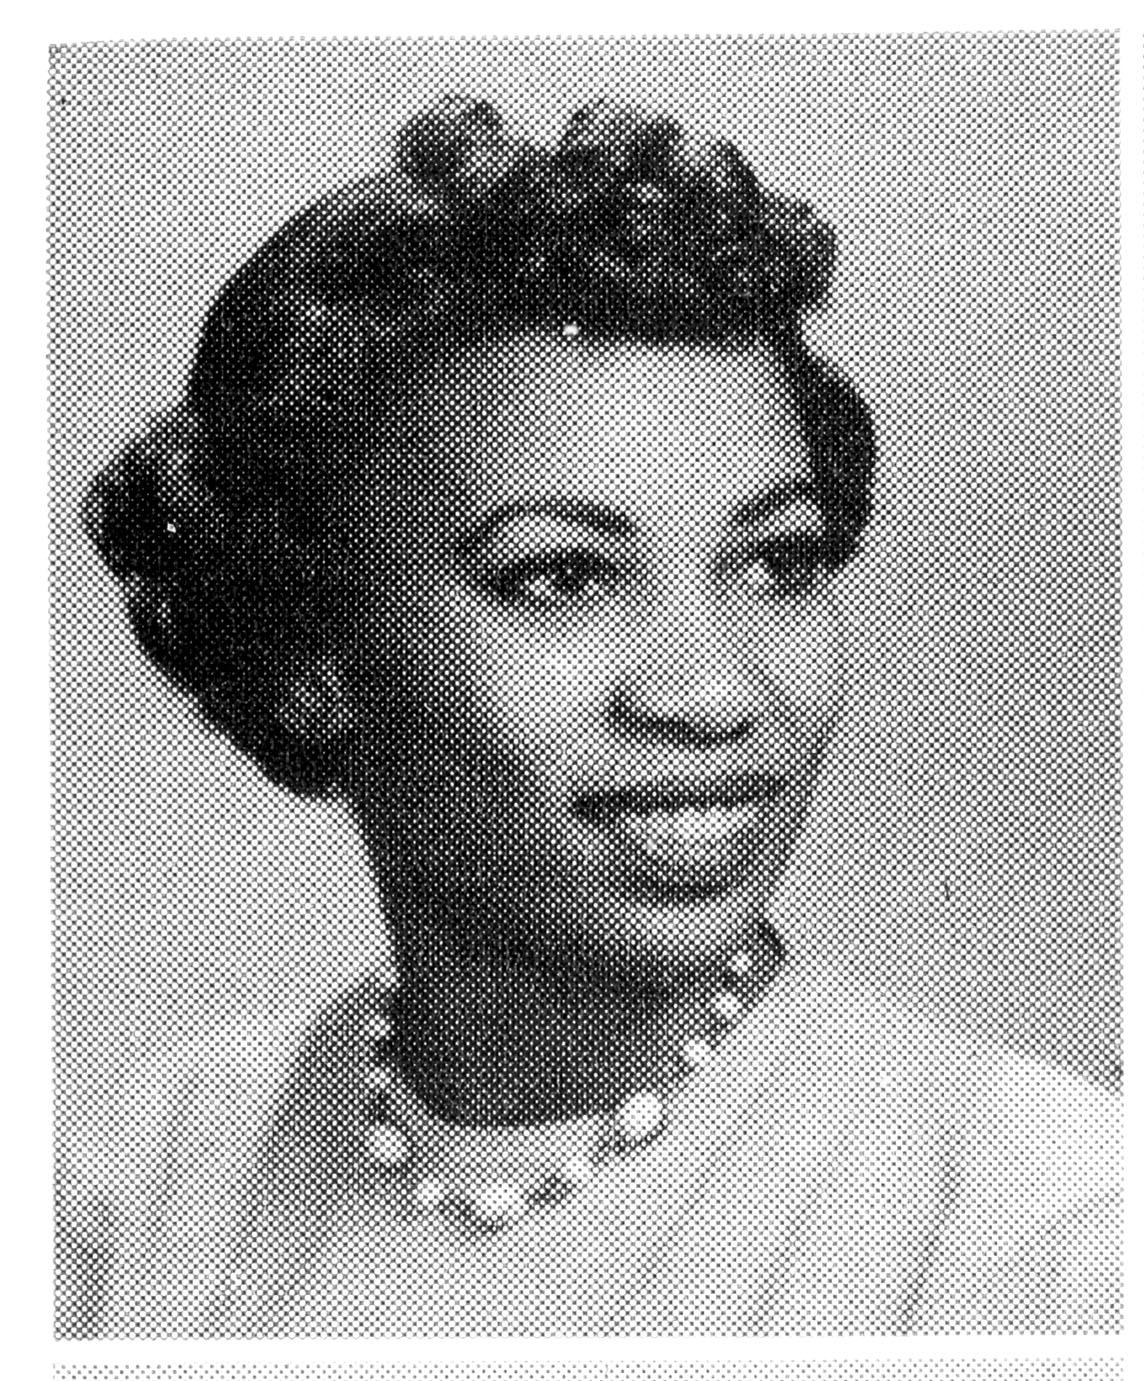 Toni Morrison's Howard University yearbook photo from 1953.